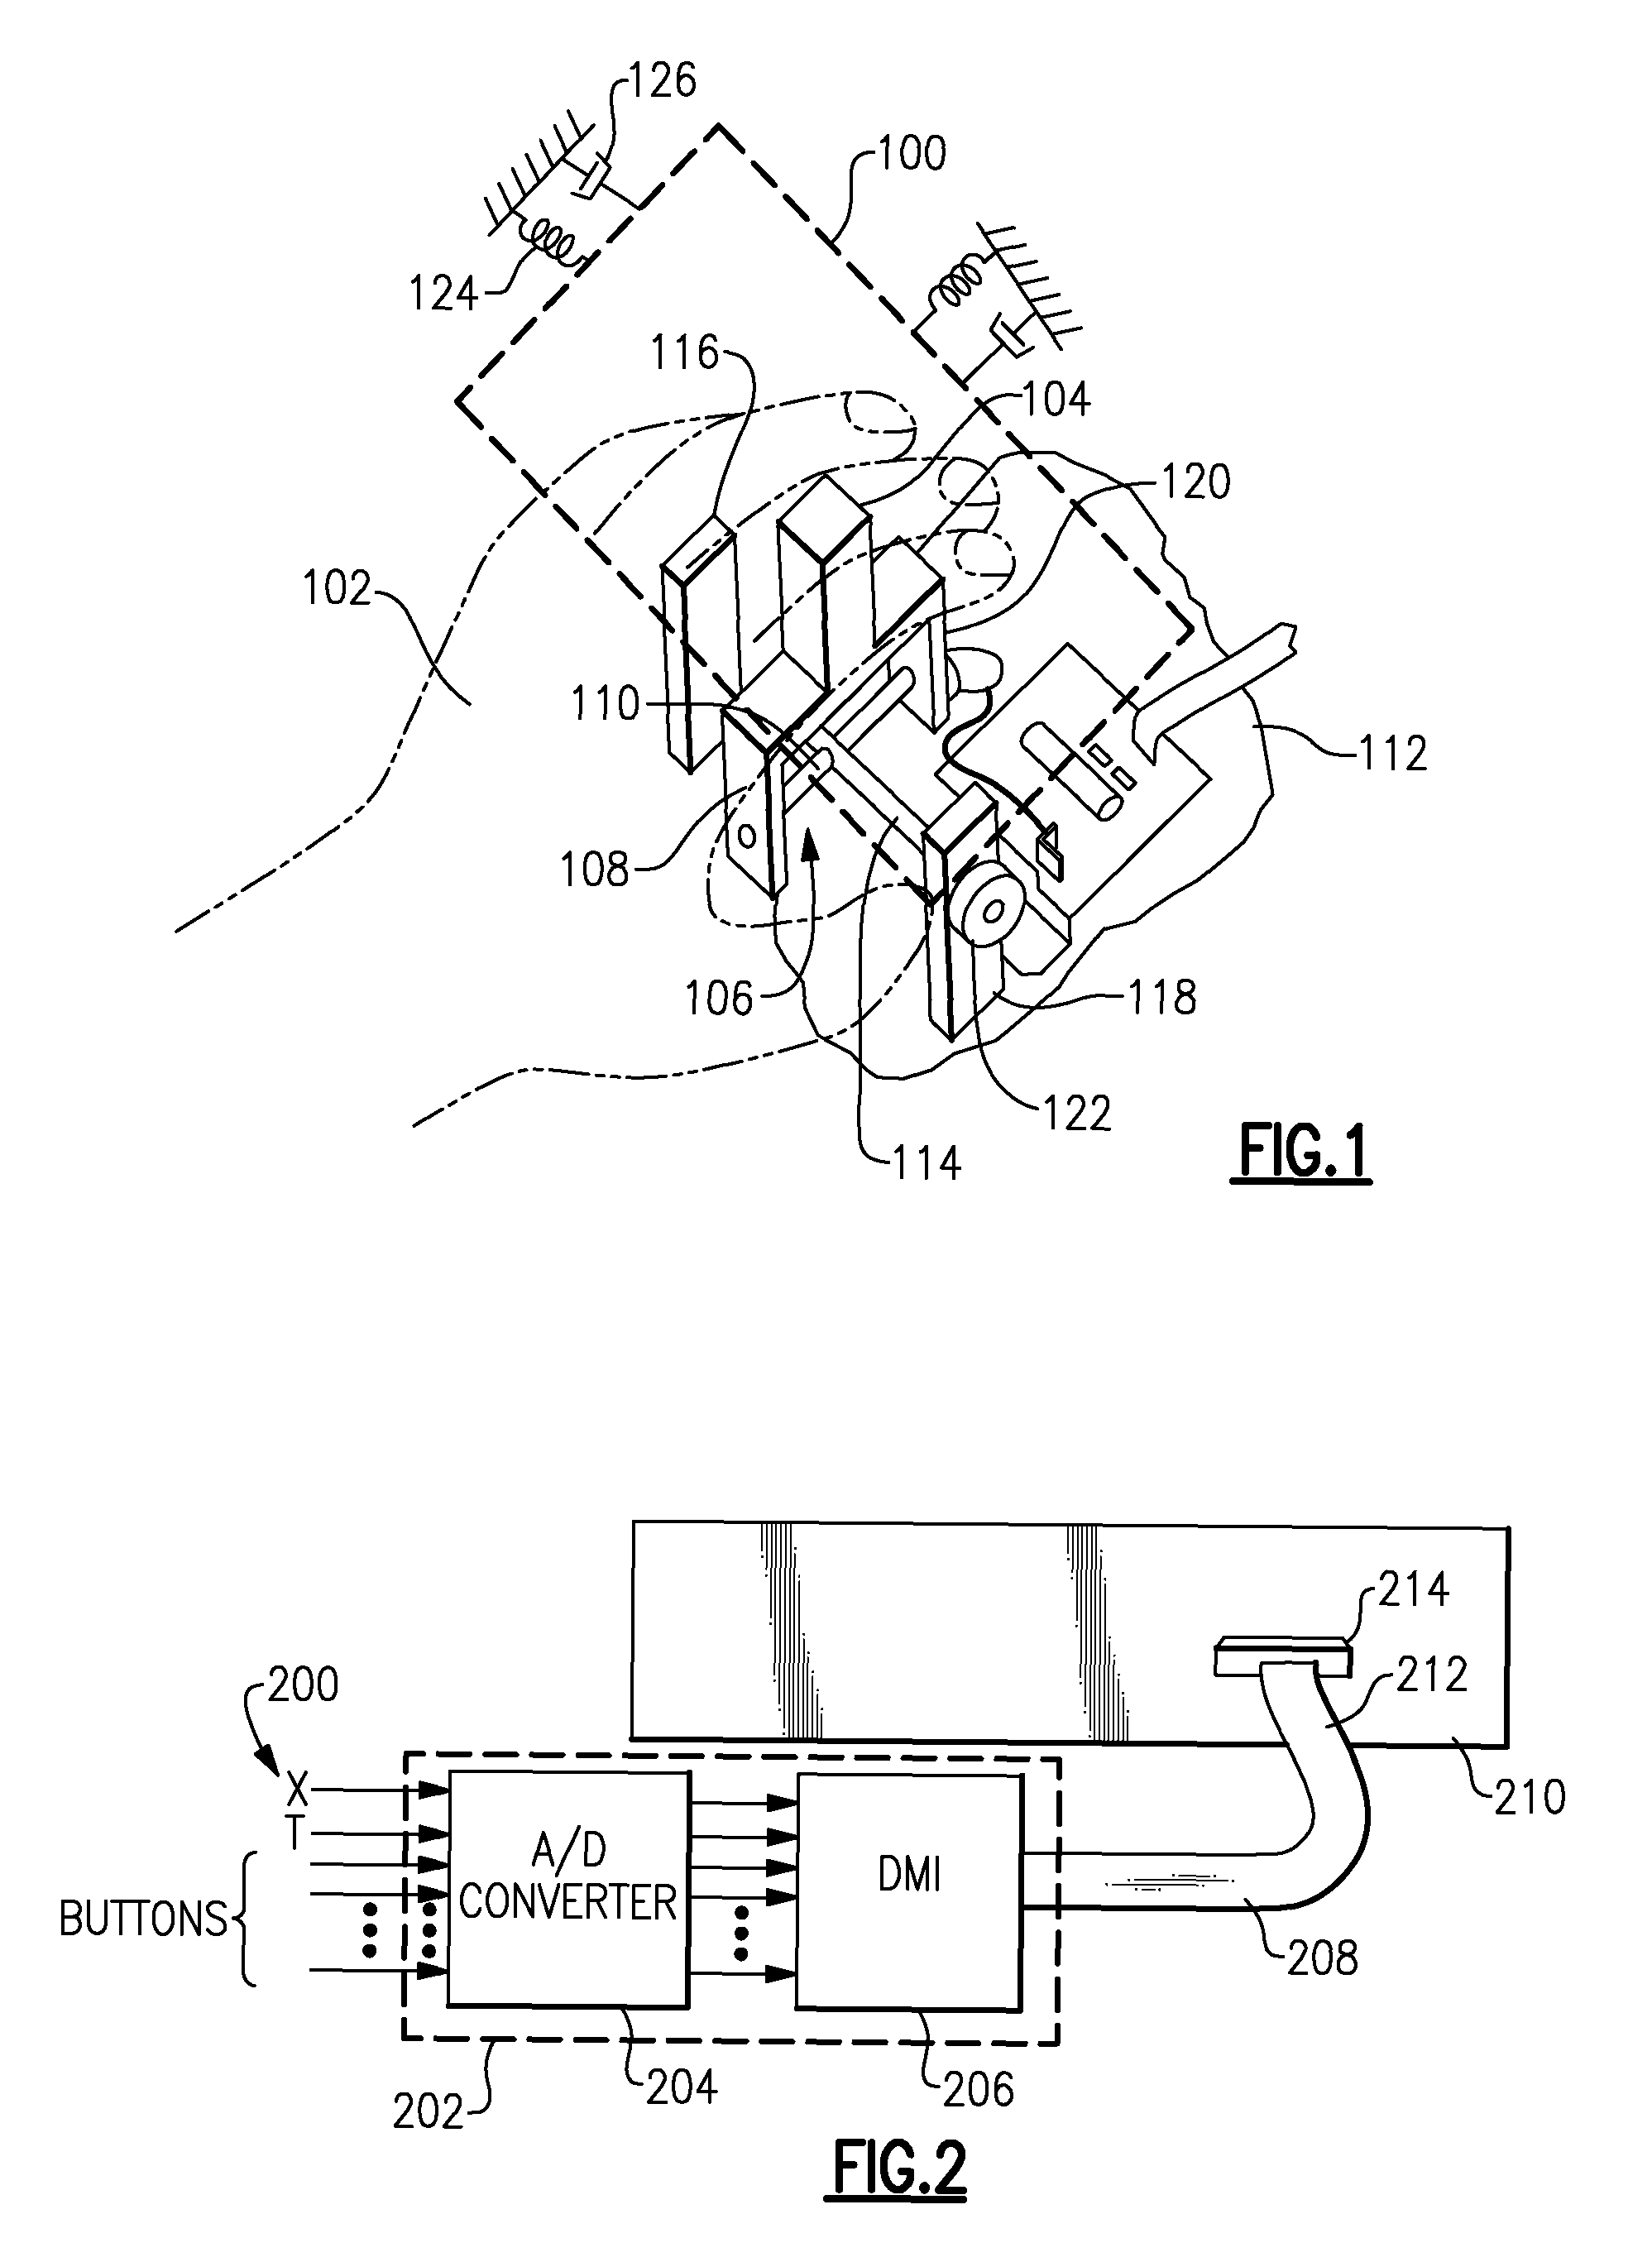 Hand activated input device with horizontal control surface